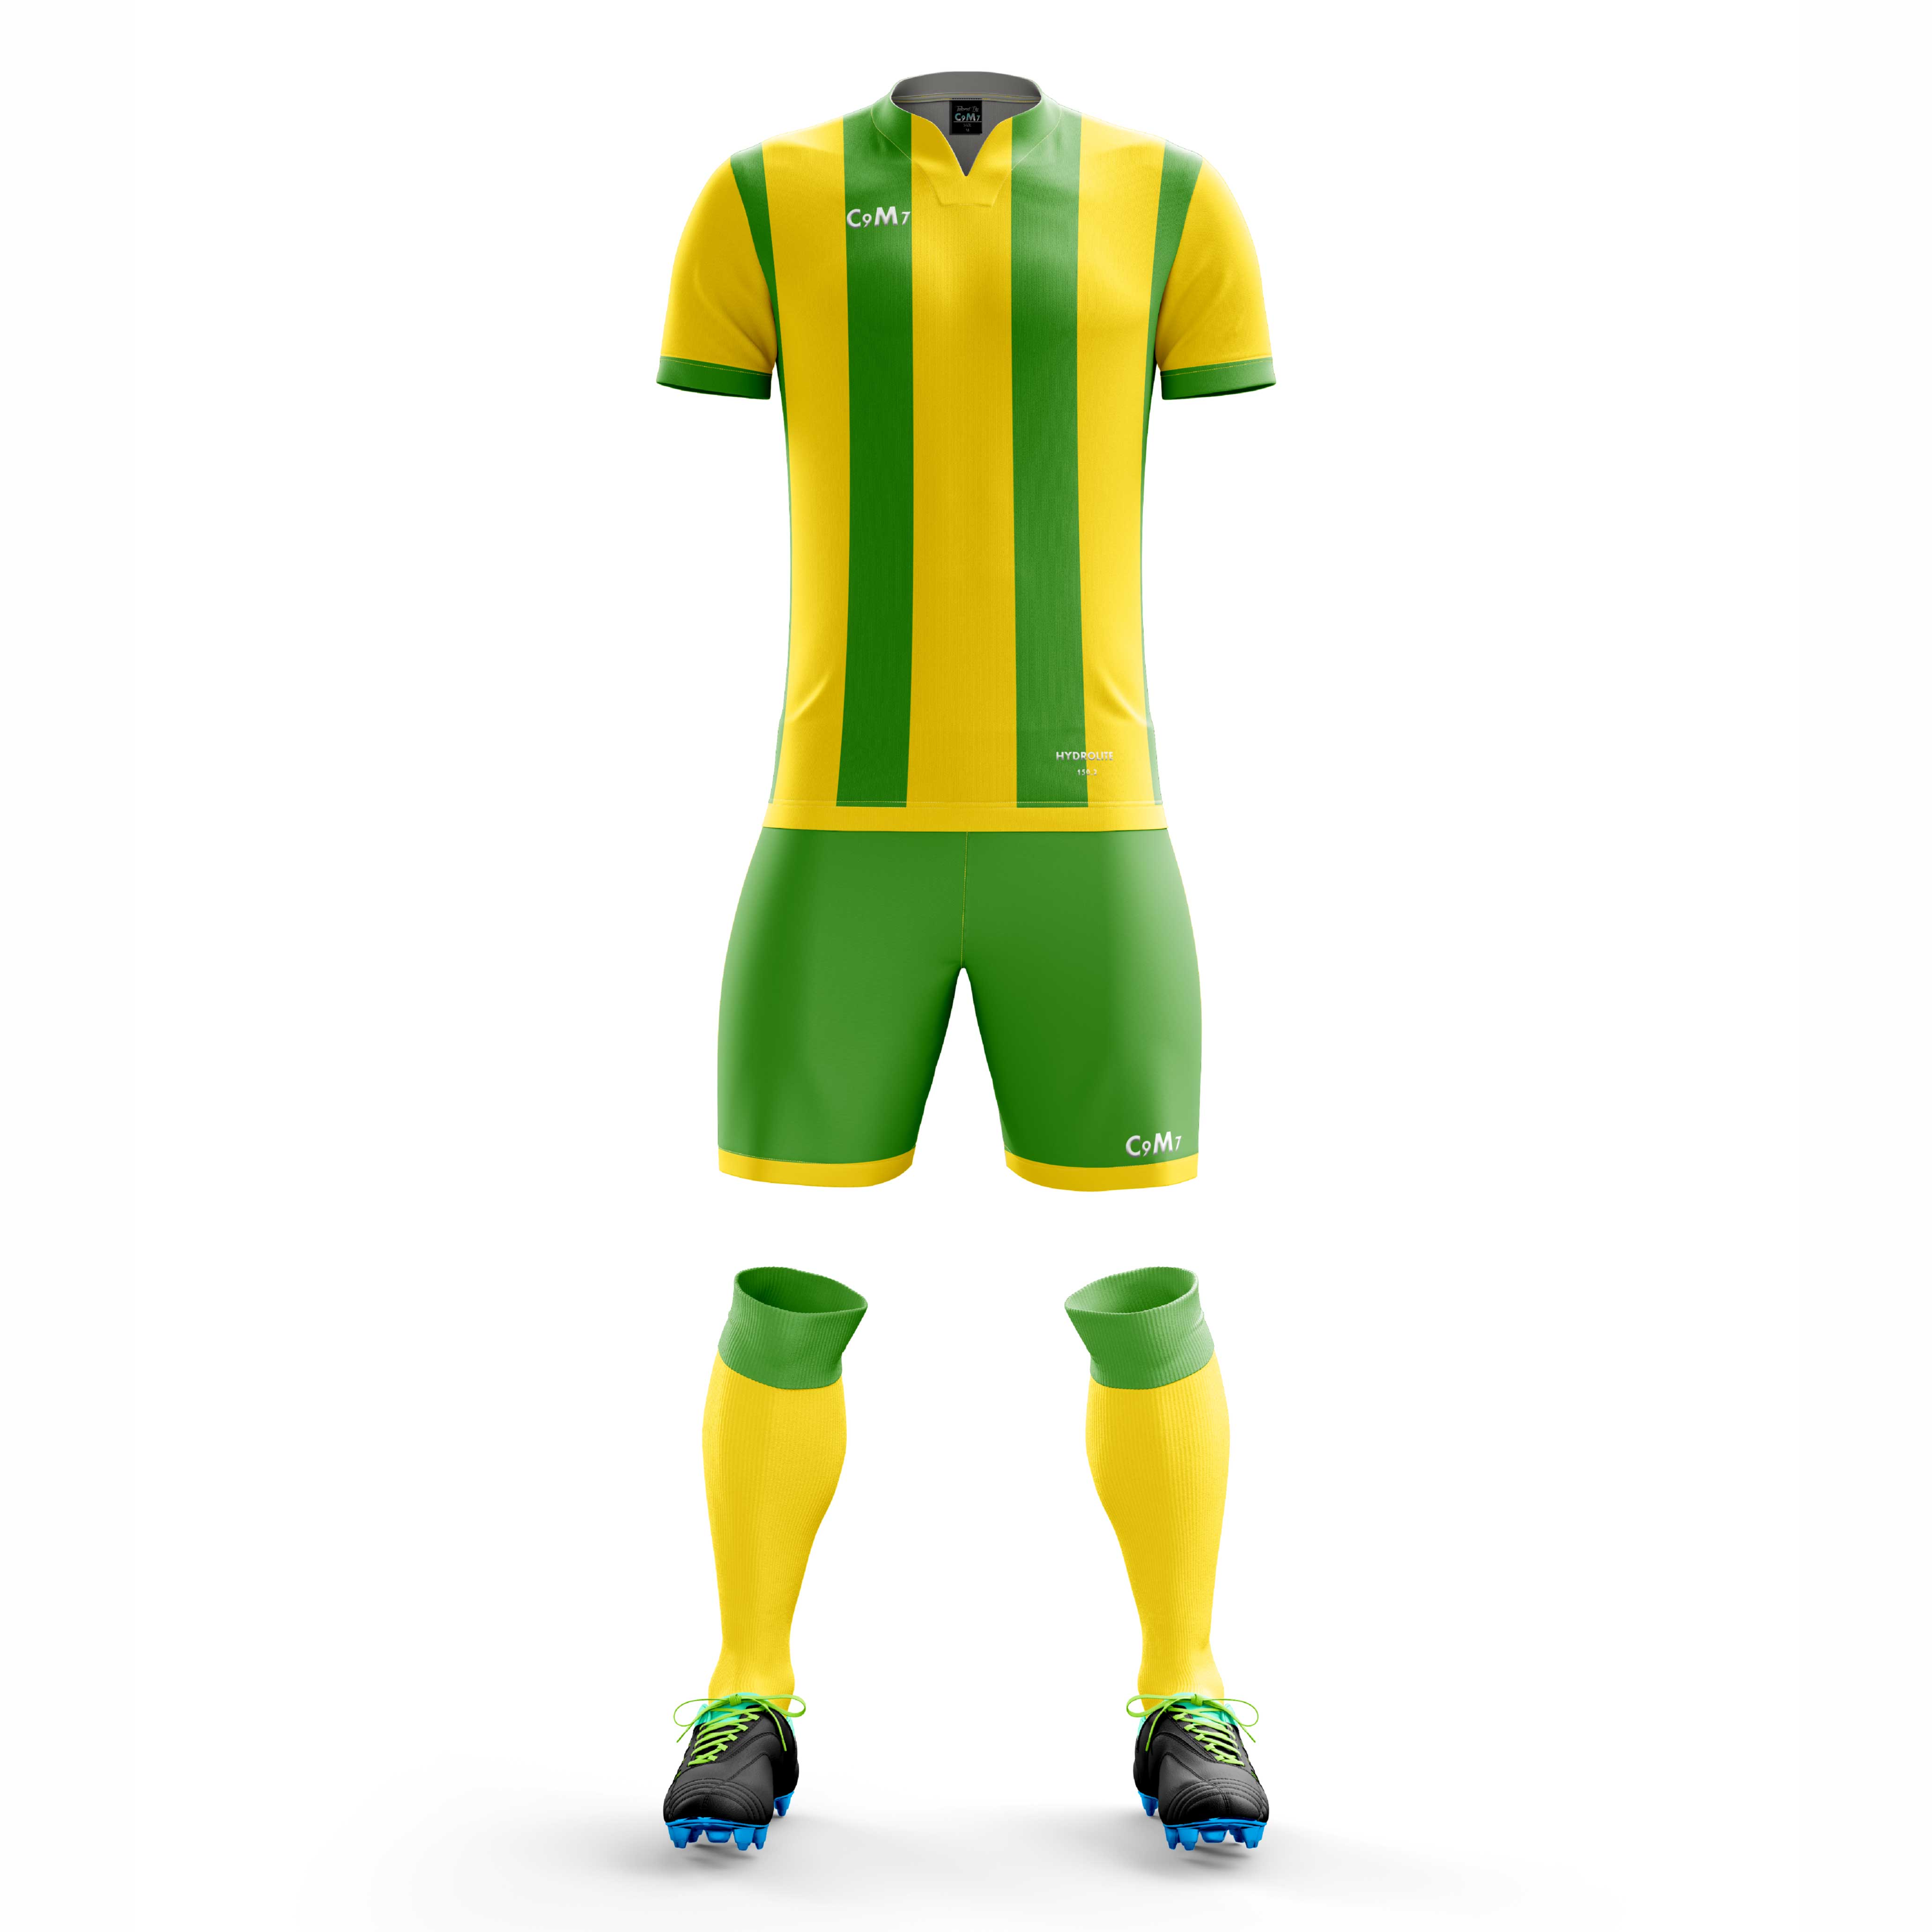 green and yellow football jersey